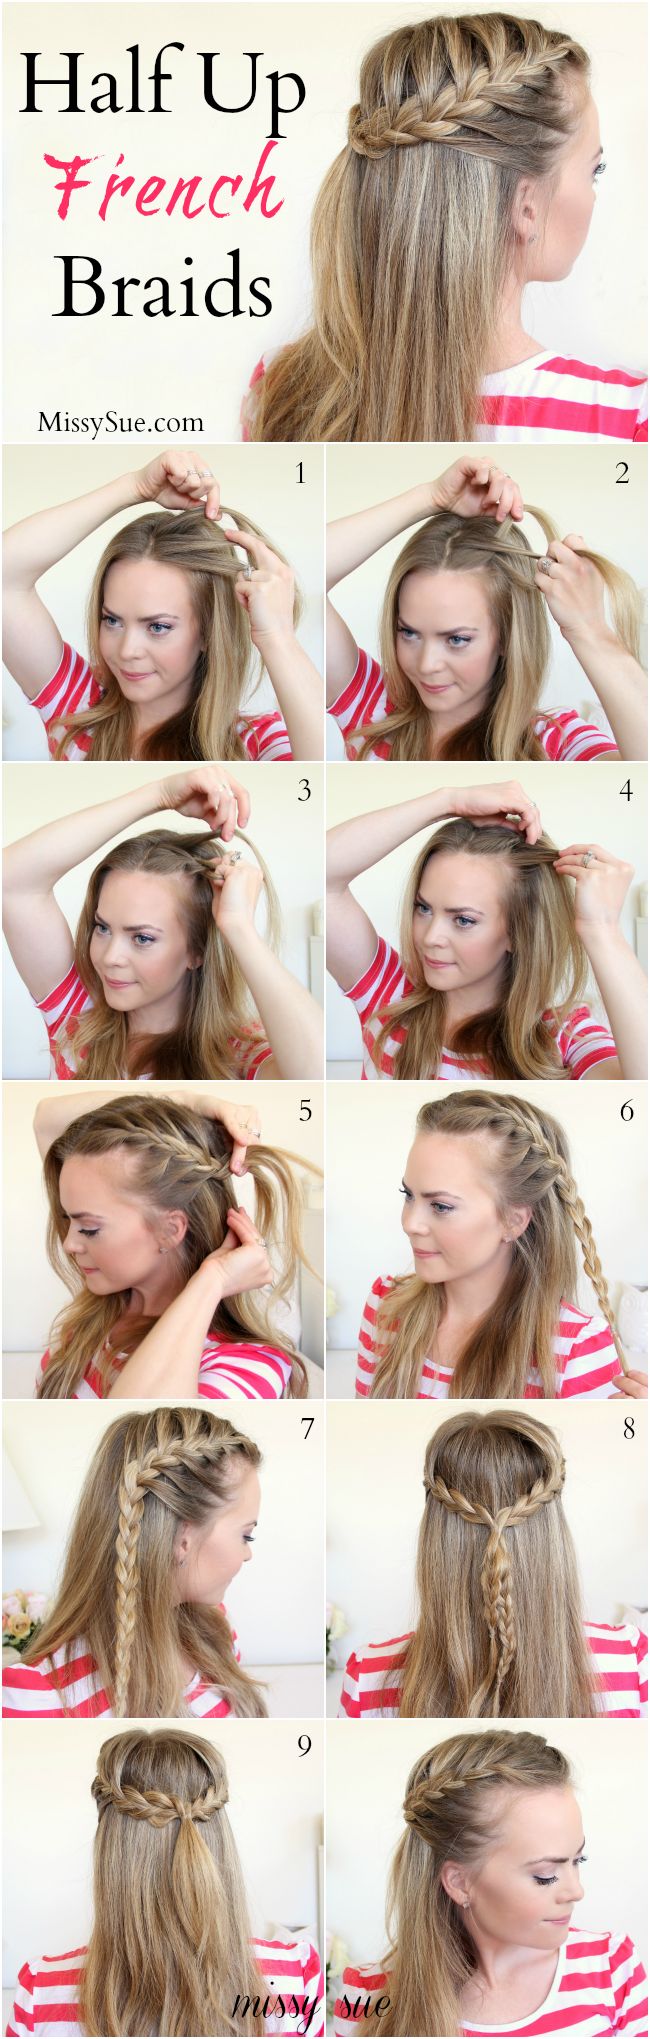 15 simple braid tutorials you've never tried